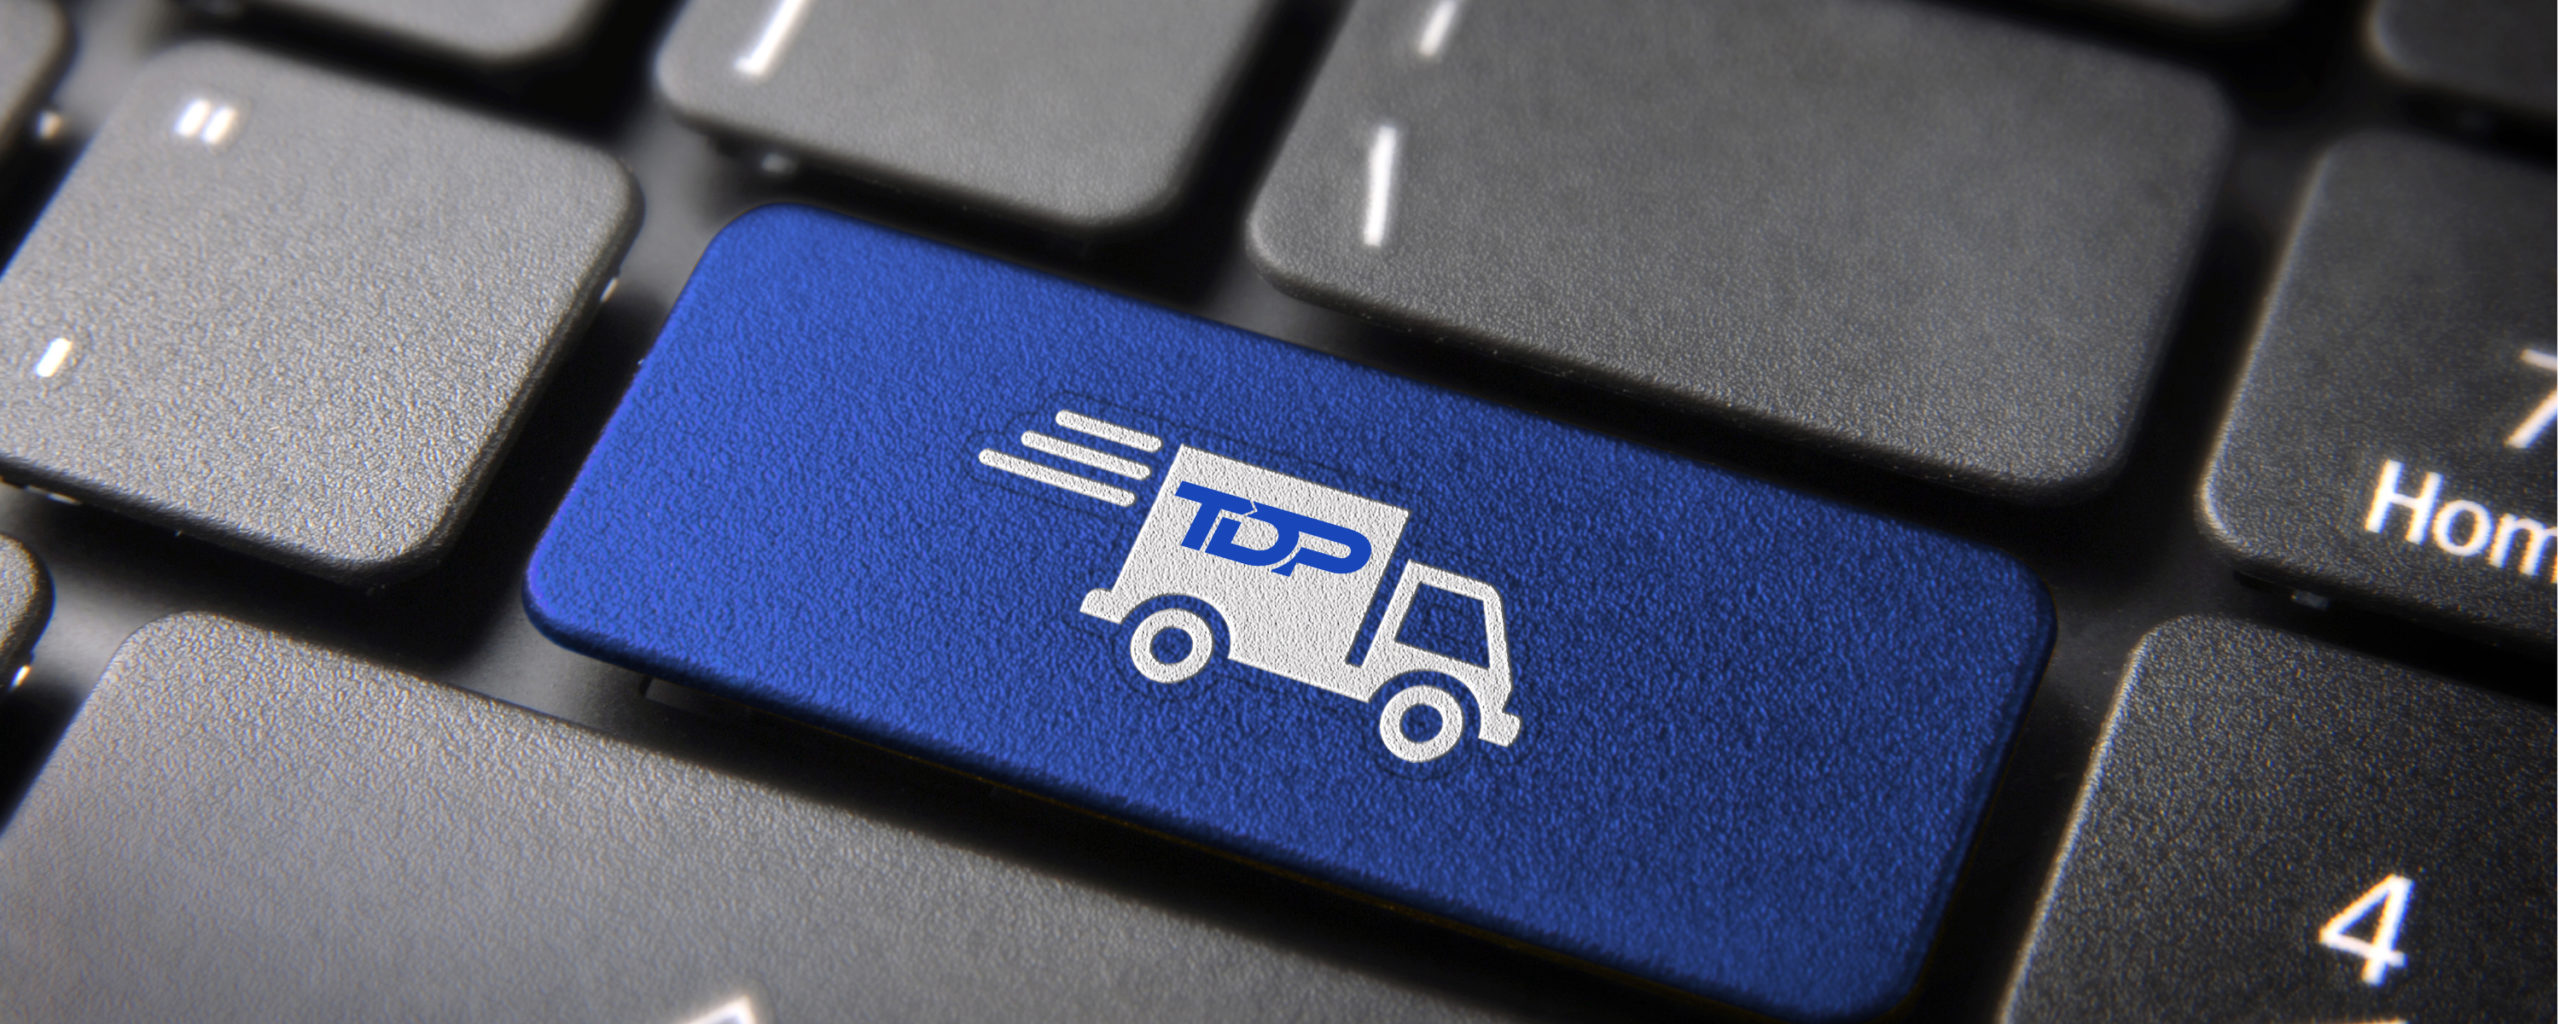 TDP Transport delivery key with truck icon on laptop keyboard. Included clipping path, so you can easily edit it.